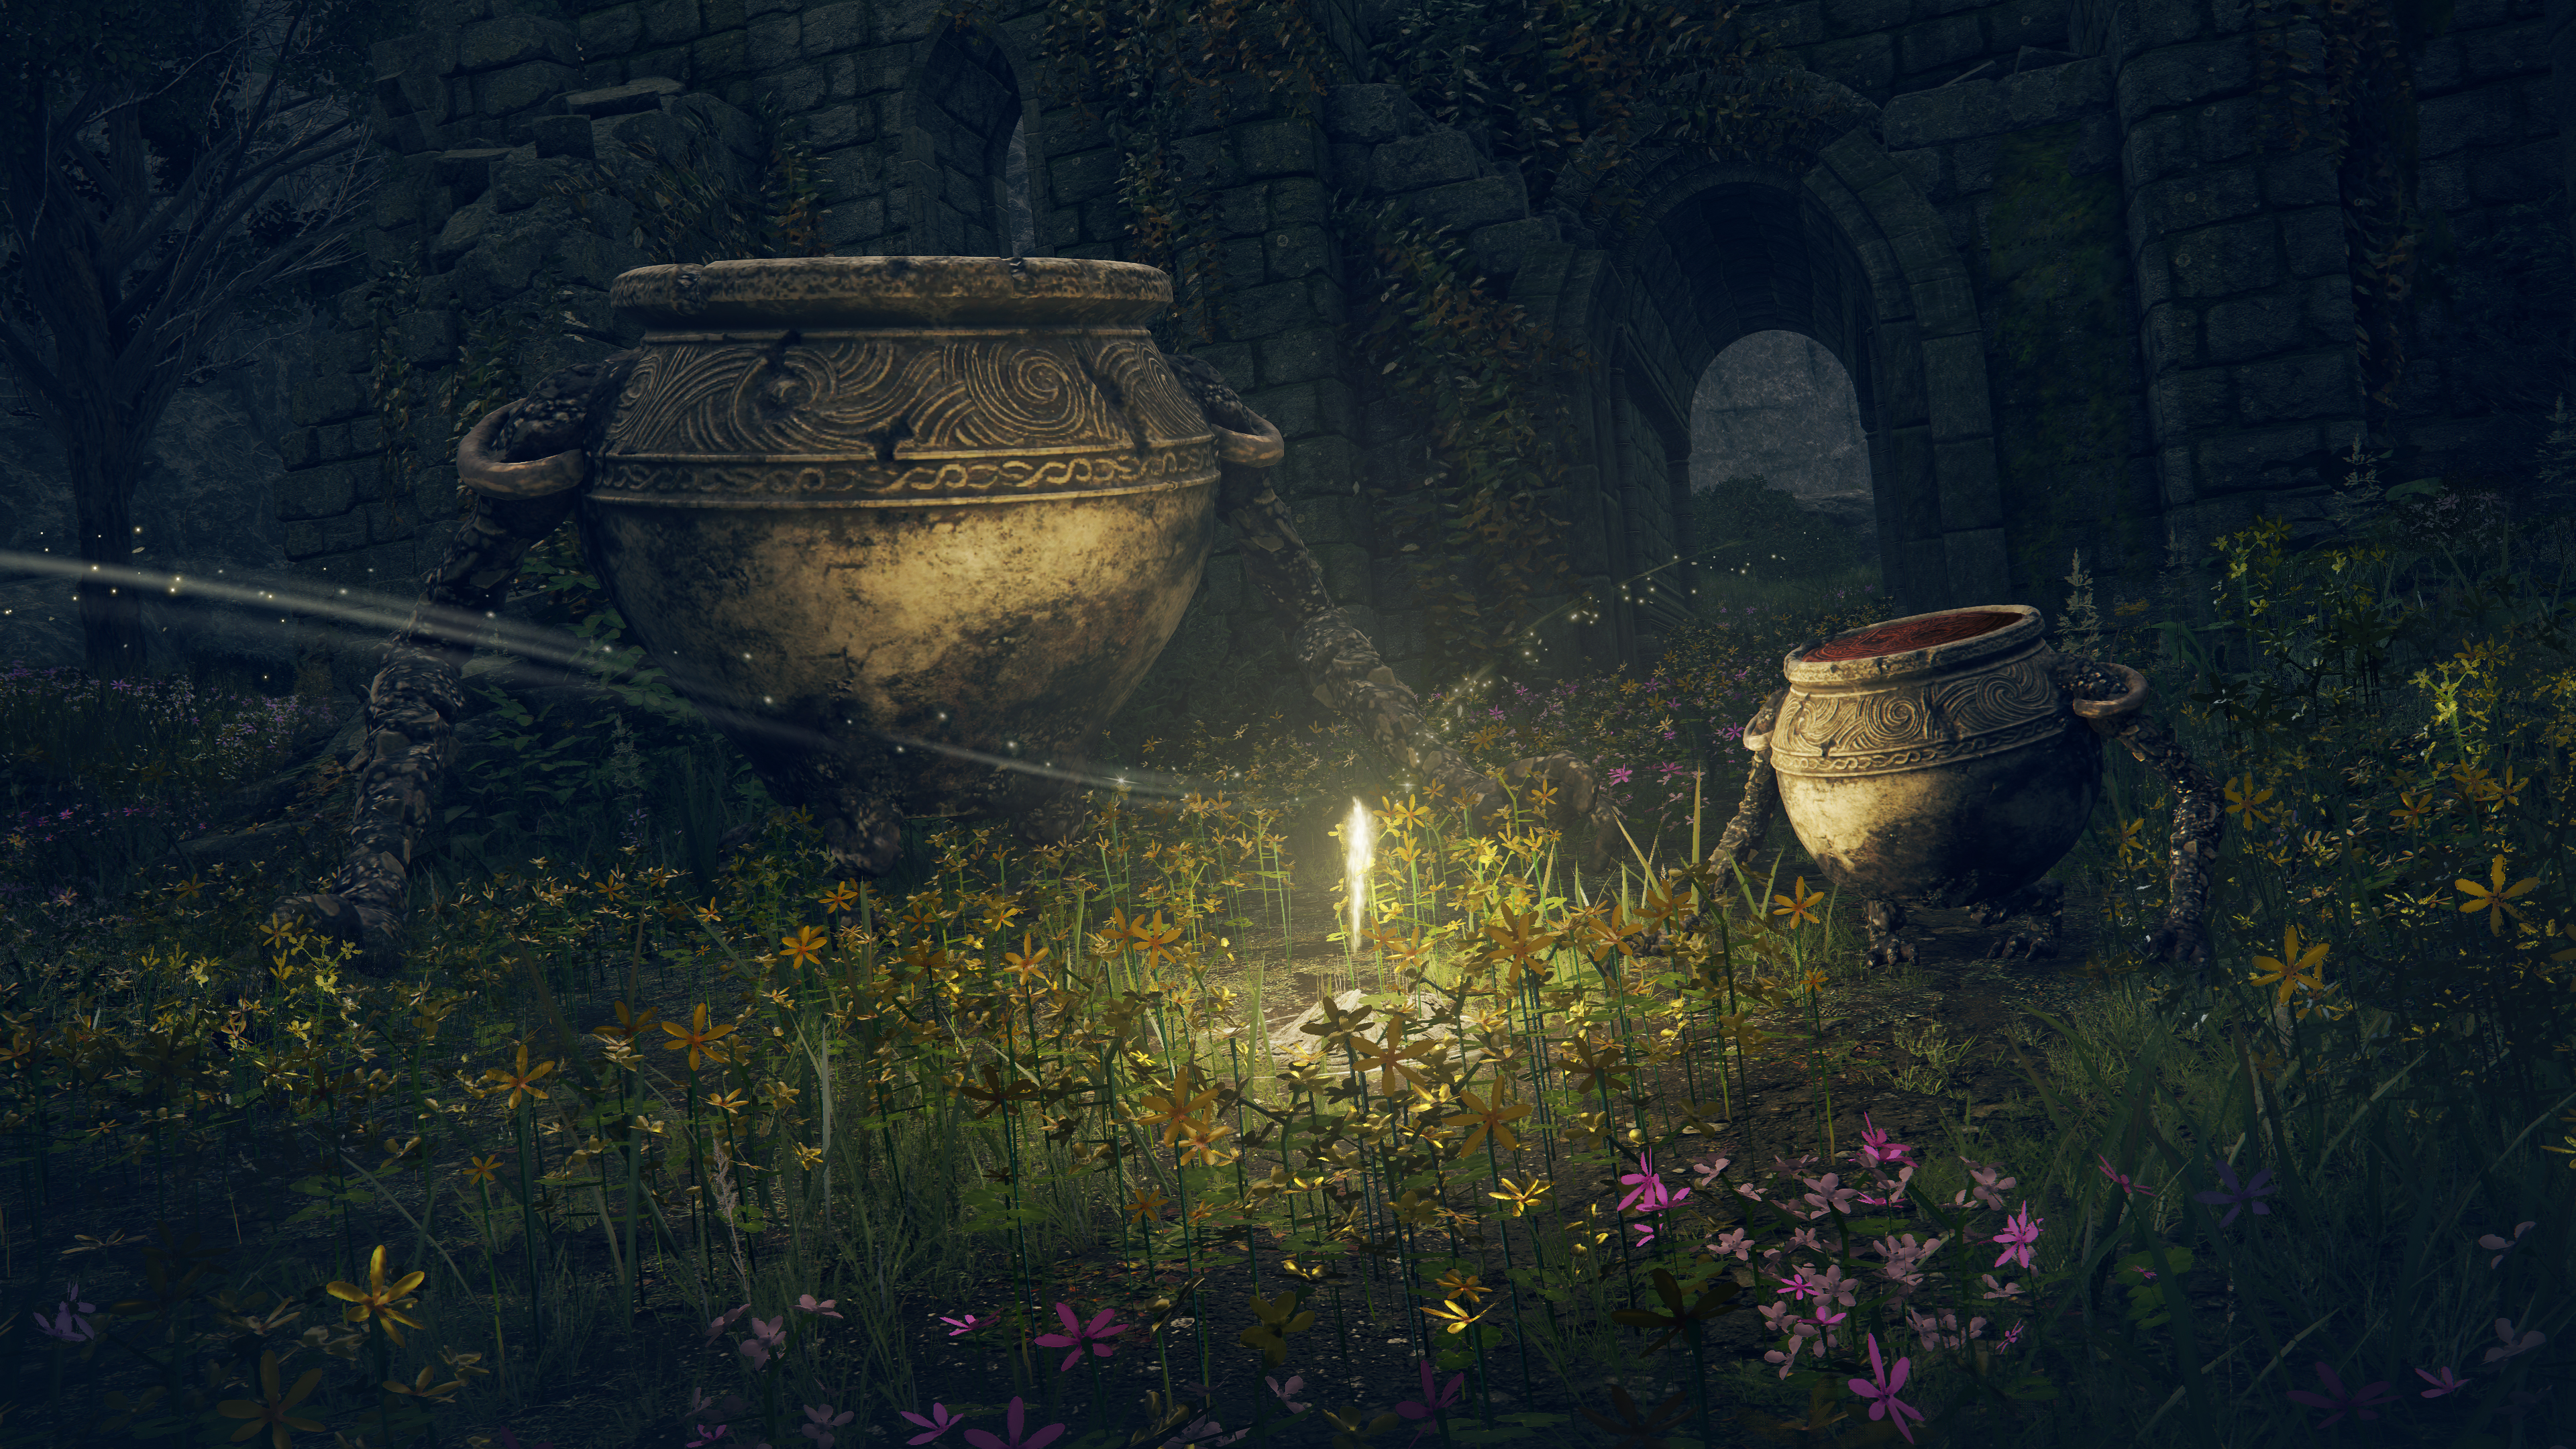 A still from the Elden Ring game showing a flowery and grassy scene illuminated by a shard of light